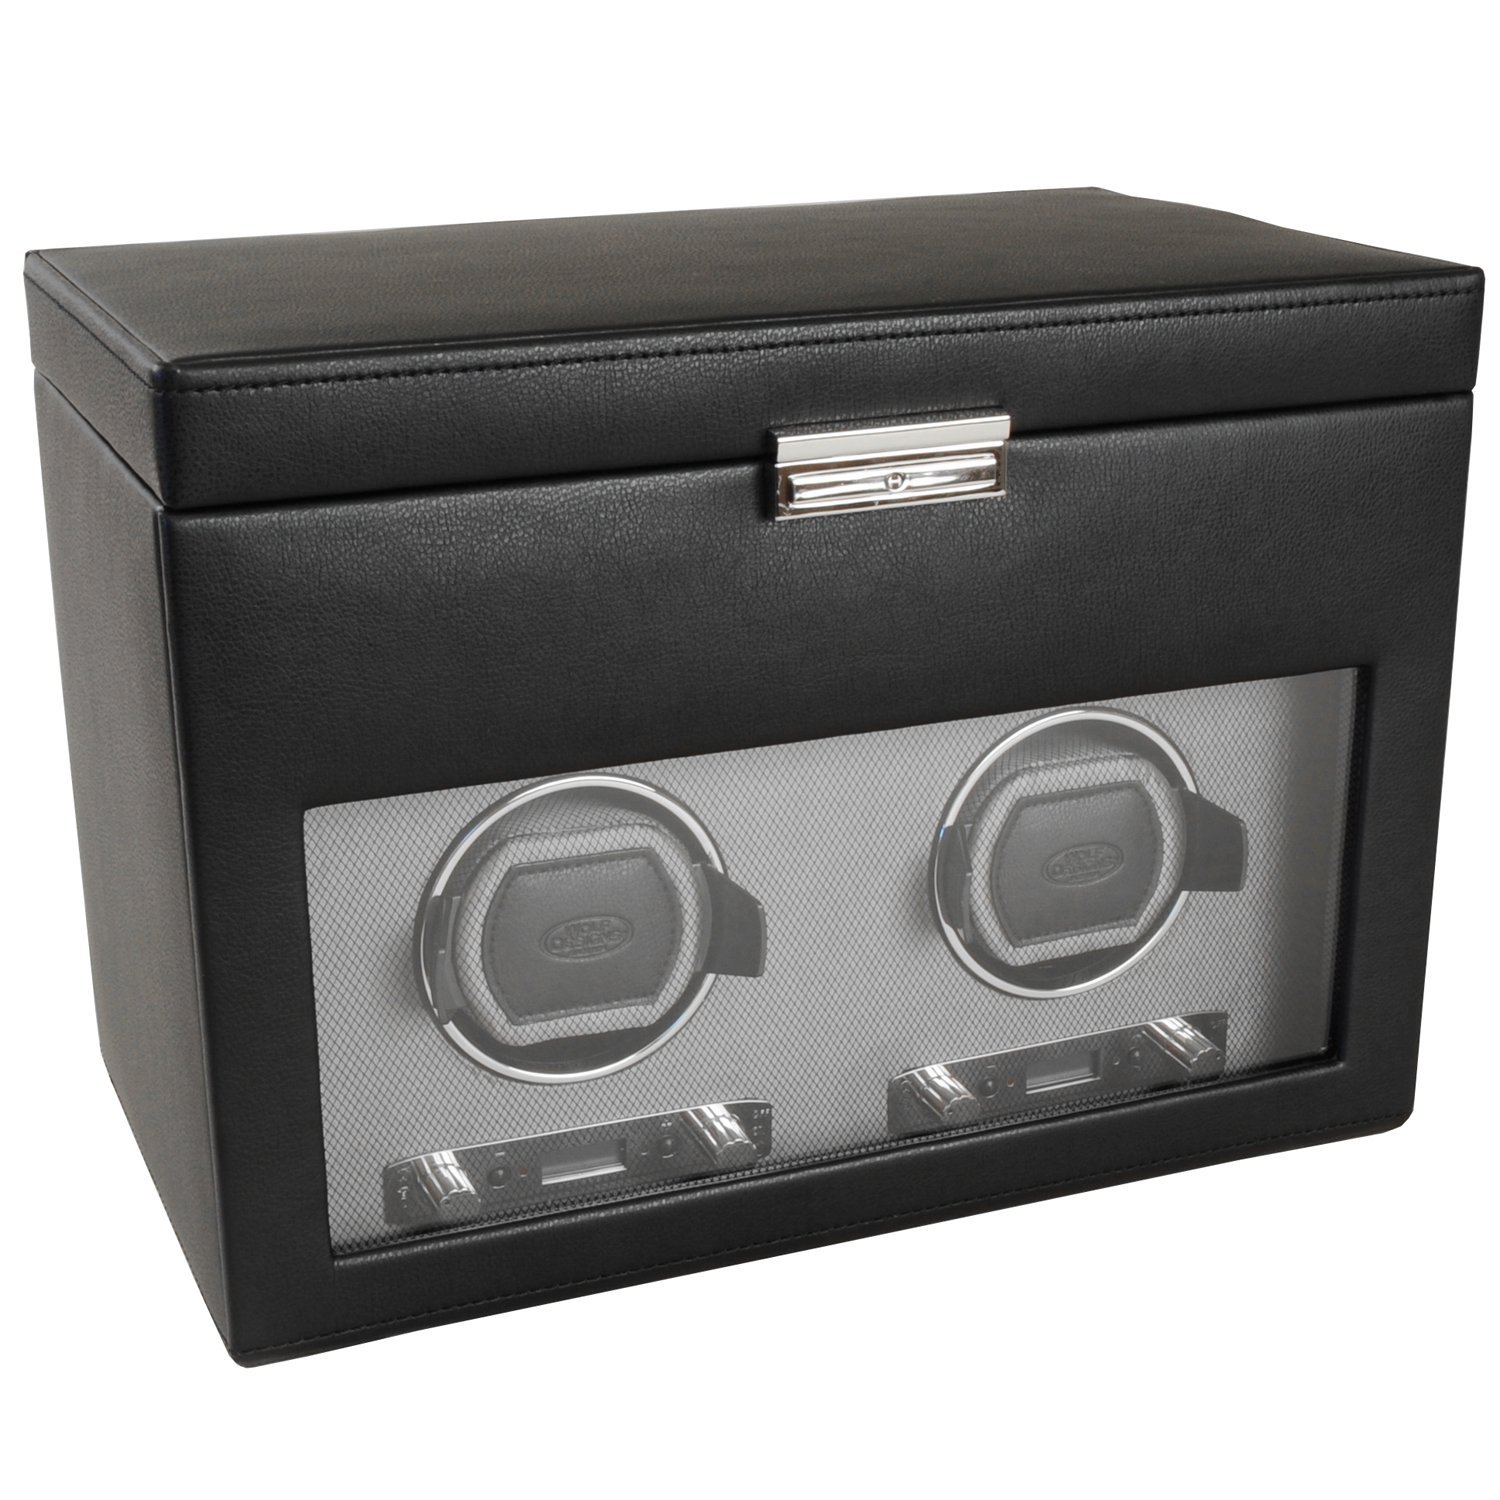 WOLF 456202 Viceroy Double Watch Winder with Cover and Storage, Black